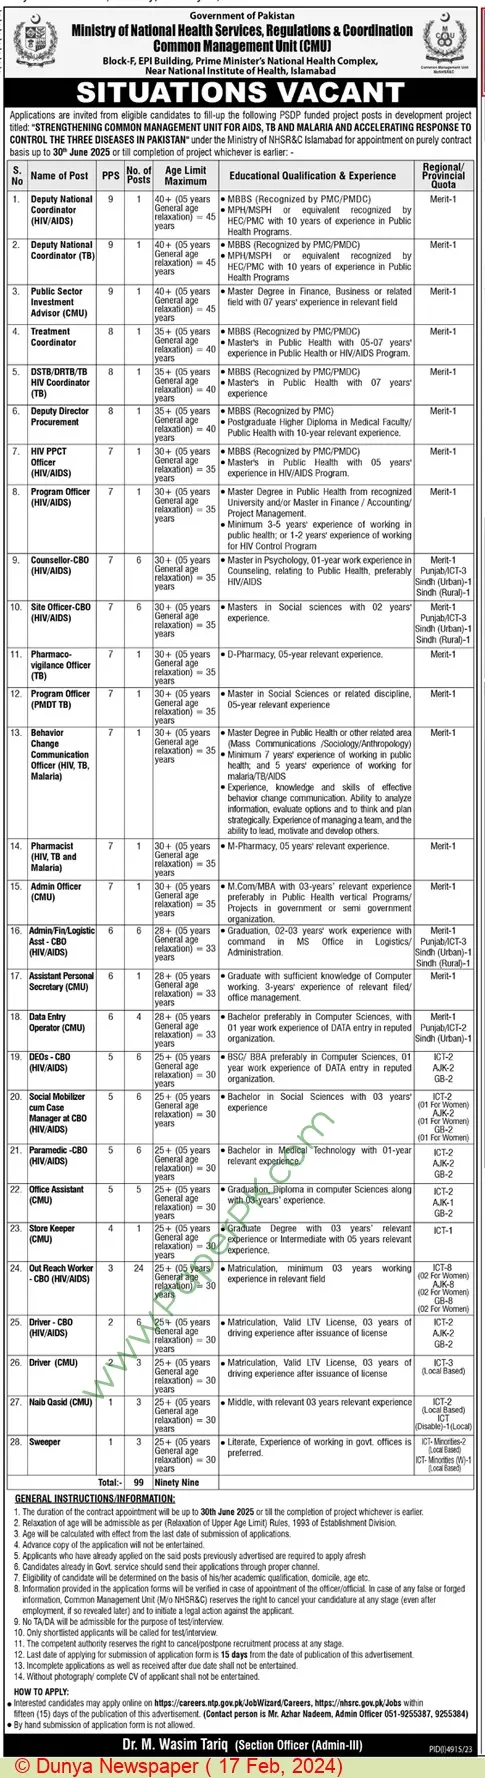 Counselor Jobs in Ministry Of National Health Services Feb 2024